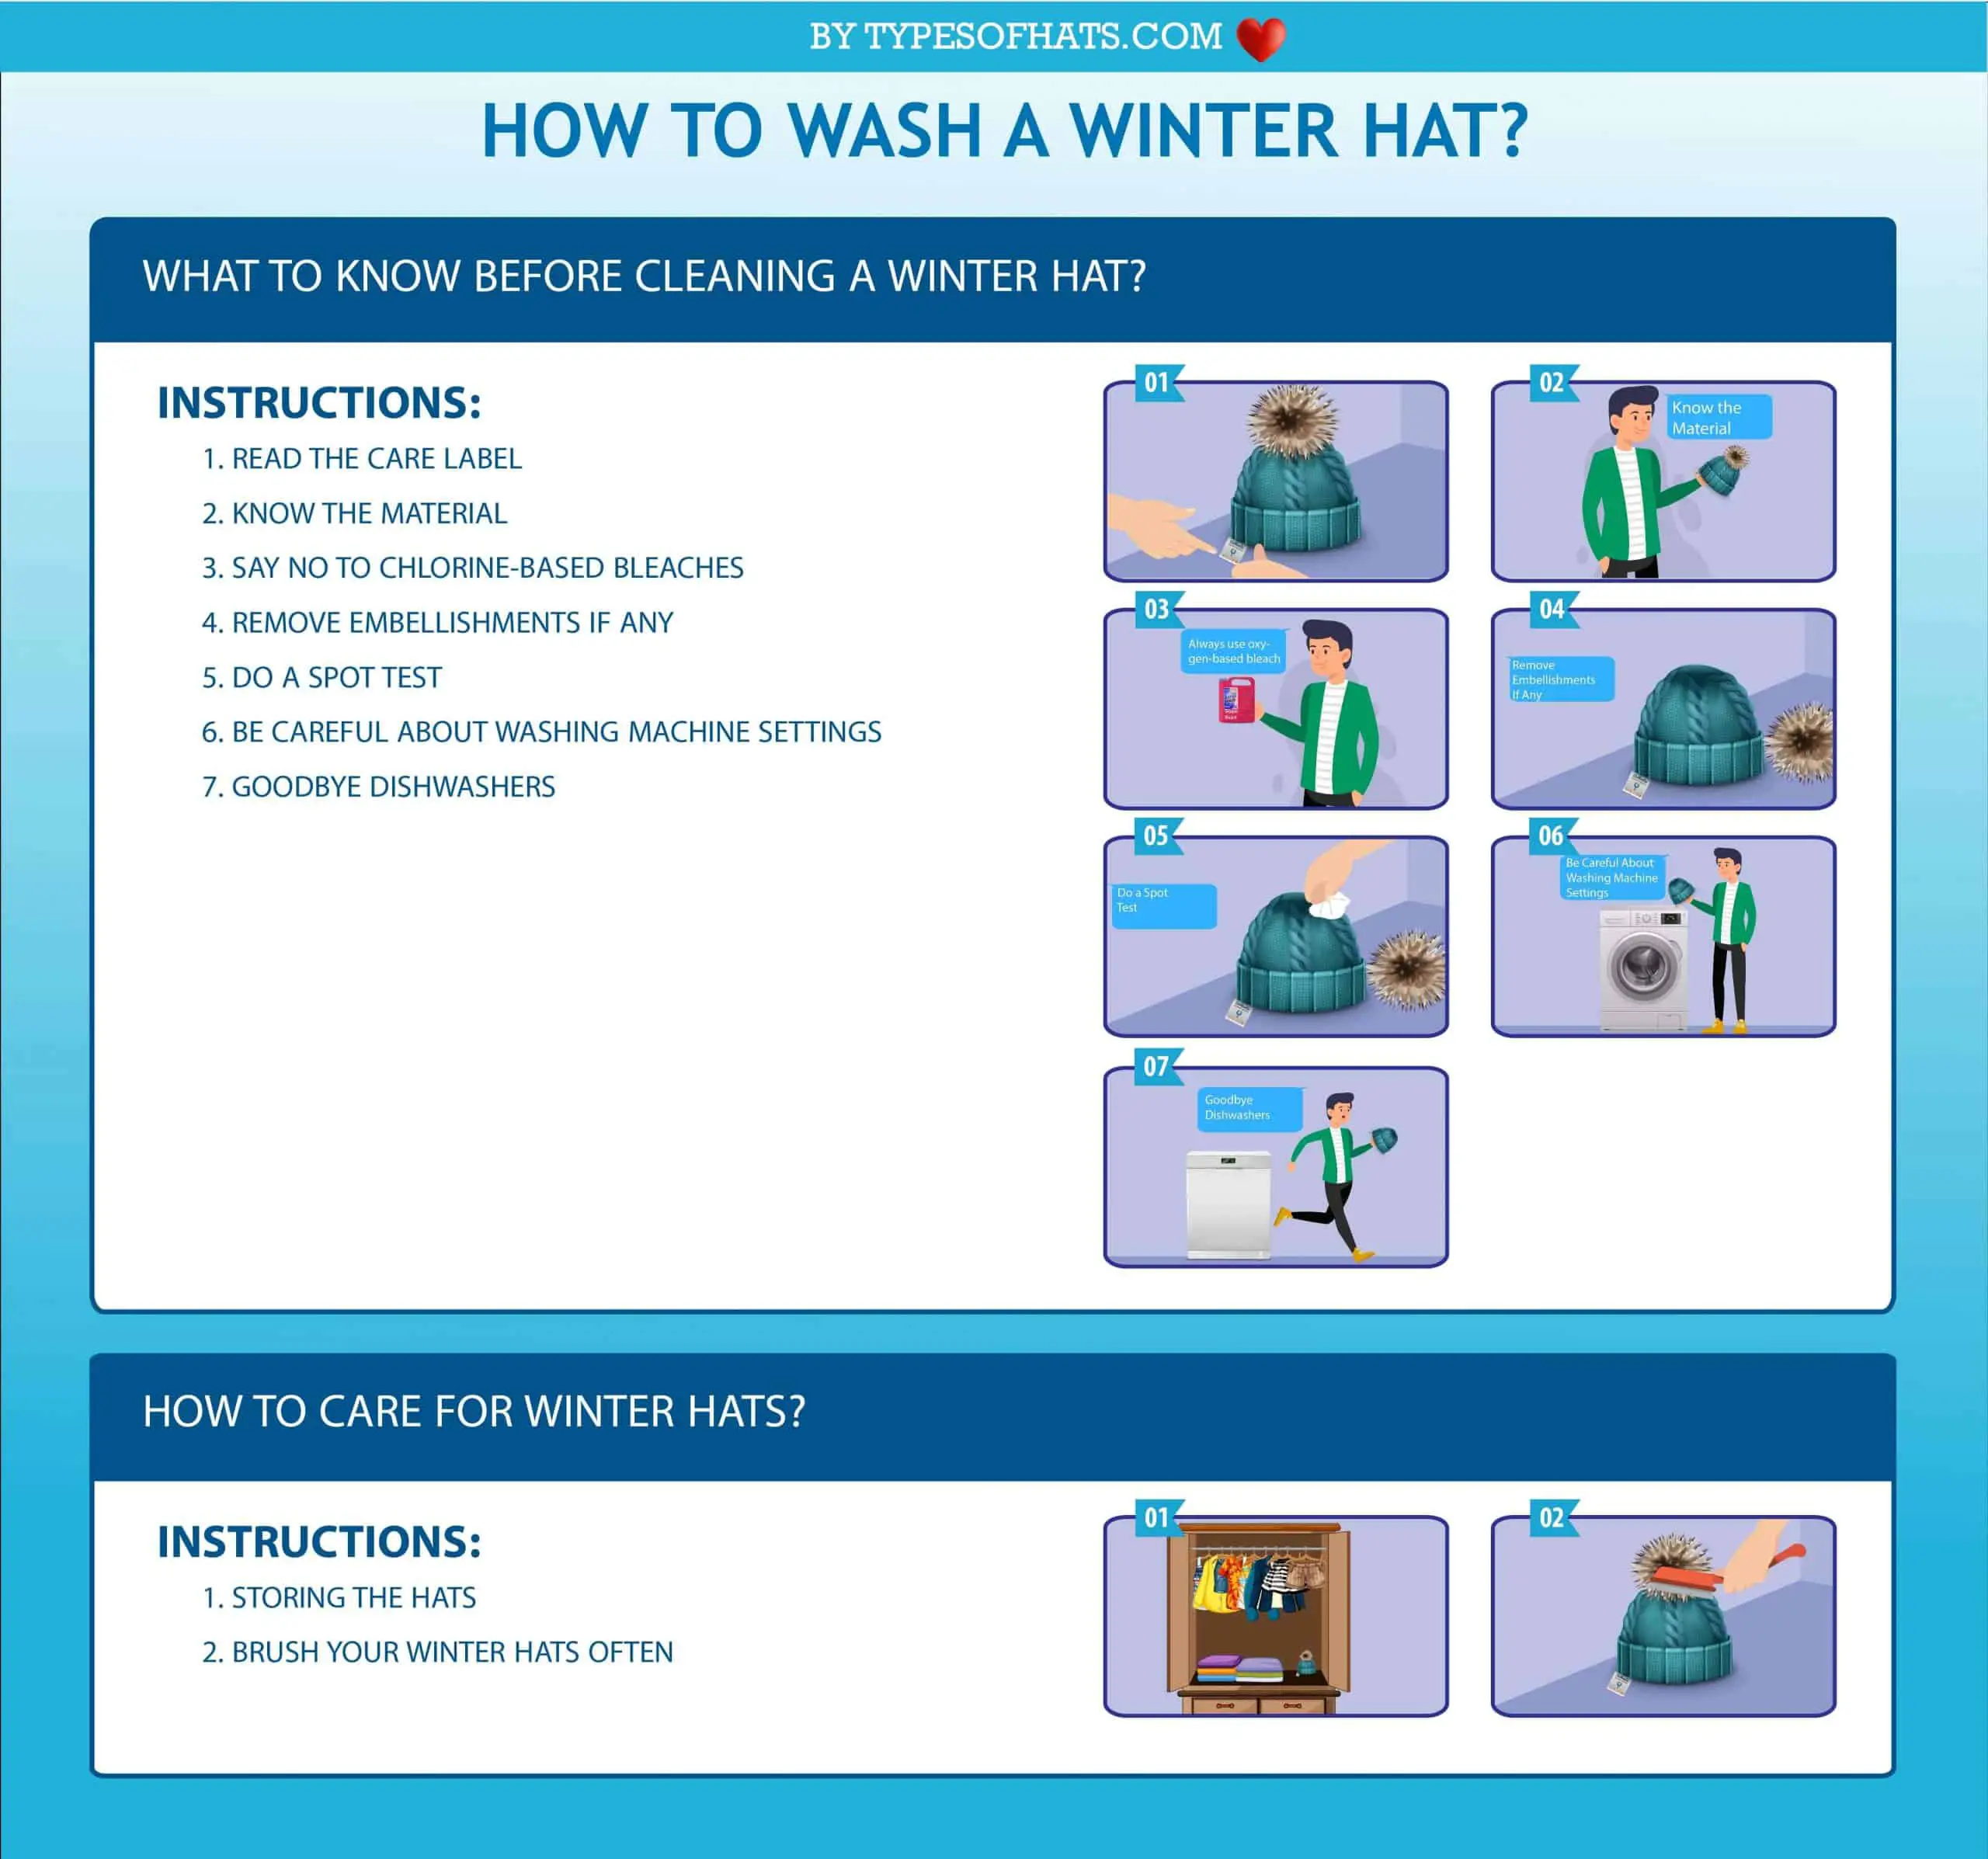 How To Wash A Winter Hat-Everything you should know